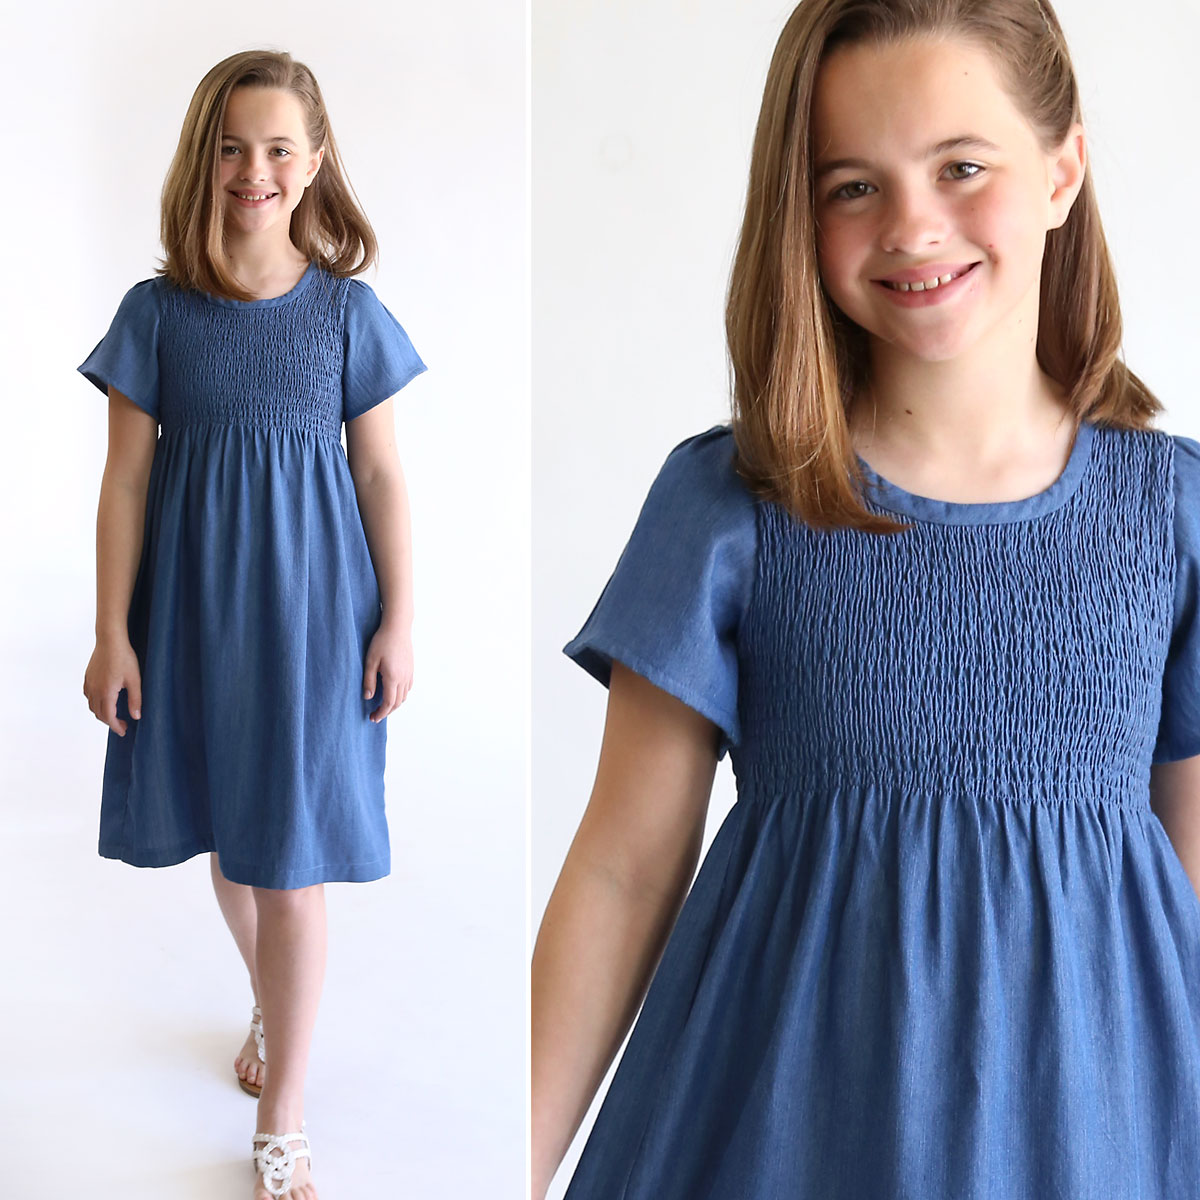 How to make a Smocked Chambray Dress - It's Always Autumn